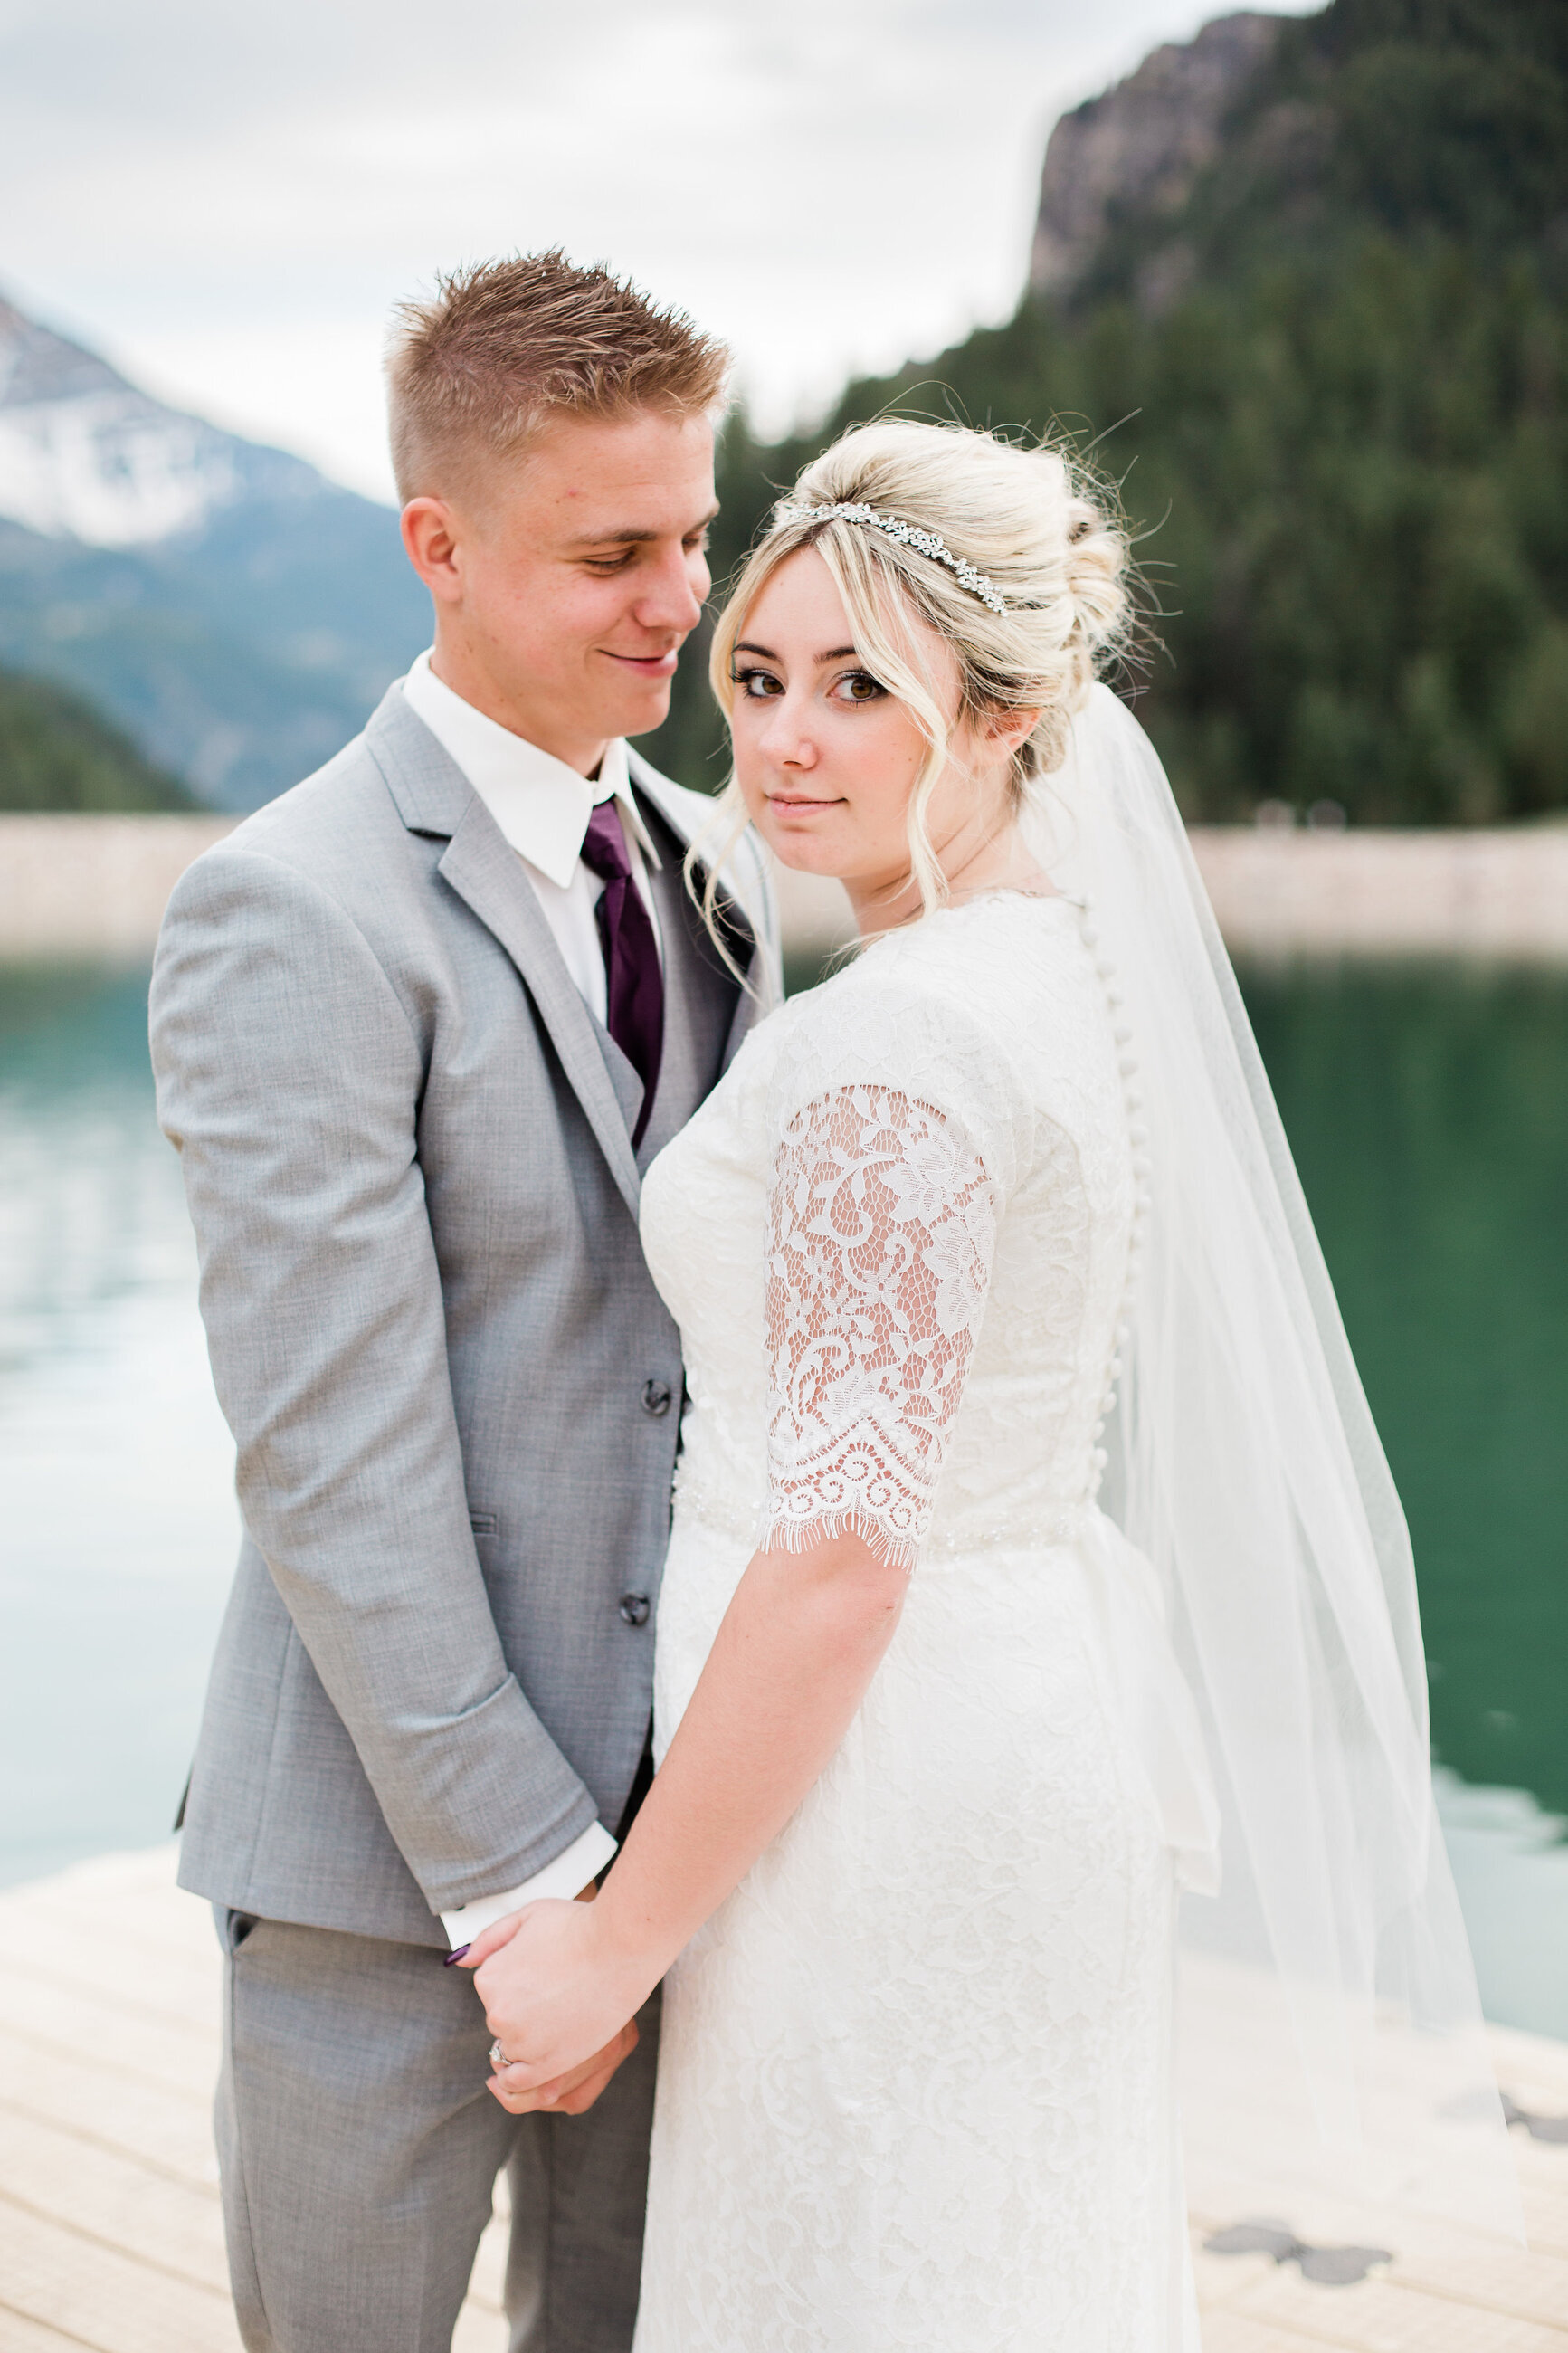 Сouple wearing a white gown and a gray suit